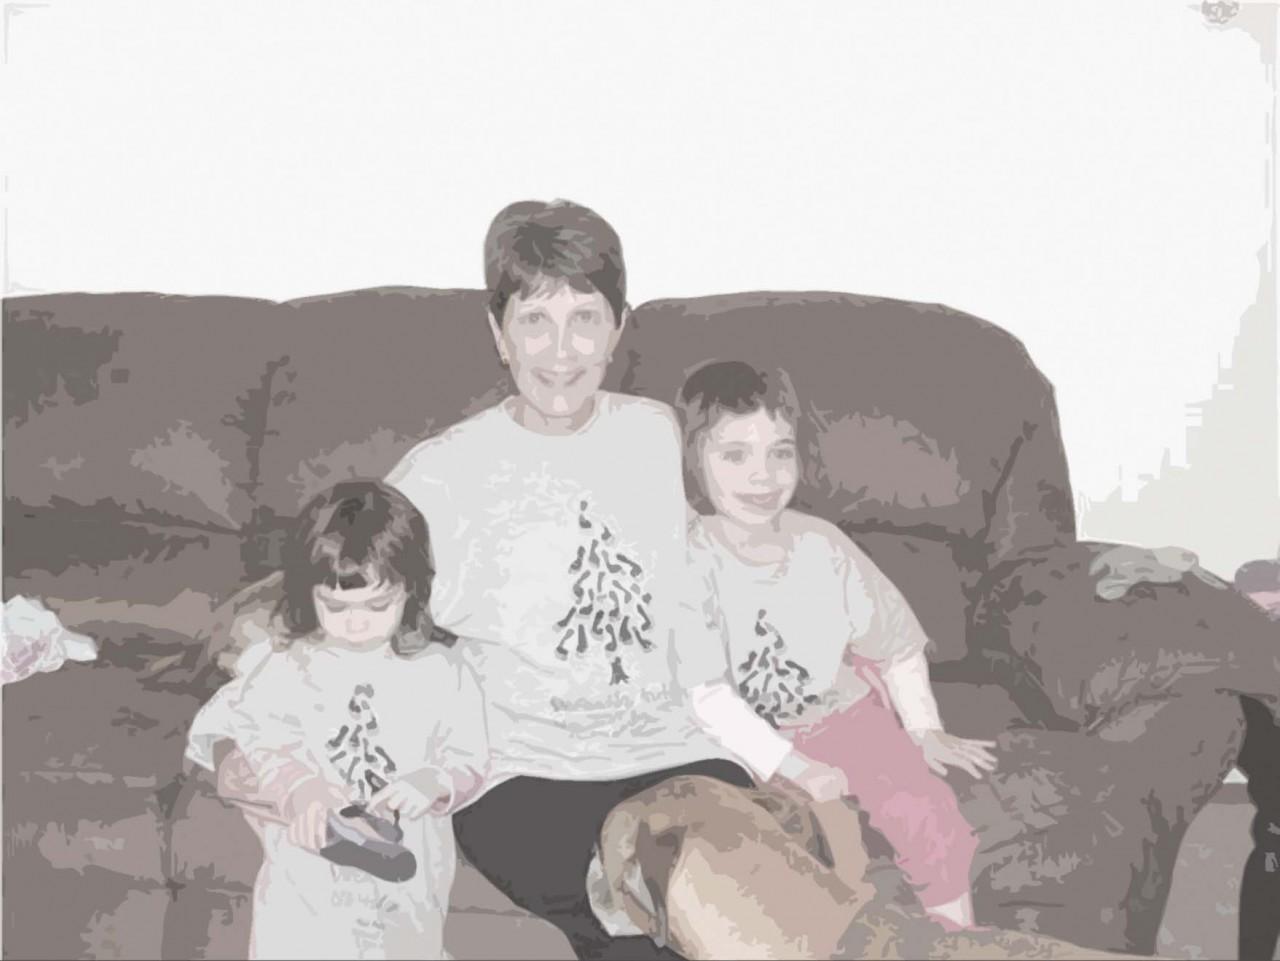  Seward Dean of Instruction Cynthia Rapp sits with granddaughters Afton Lemmon, left,  and Caitlin Lemmon. The family had 
participated in a walk as part of April’s Autism Awareness Month. Caitlin, 5, is 
diagnosed with autism. But 
surrounded by 
family members such as Rapp, 
sister Afton and pooch Vinnie, 
along with 
doctors, she’s 
making strides.  Autism affects  about one in 110 births.The background is a drawing by Caitlin featured on a Christmas card for Alpine Autism Center.
Photo illustration